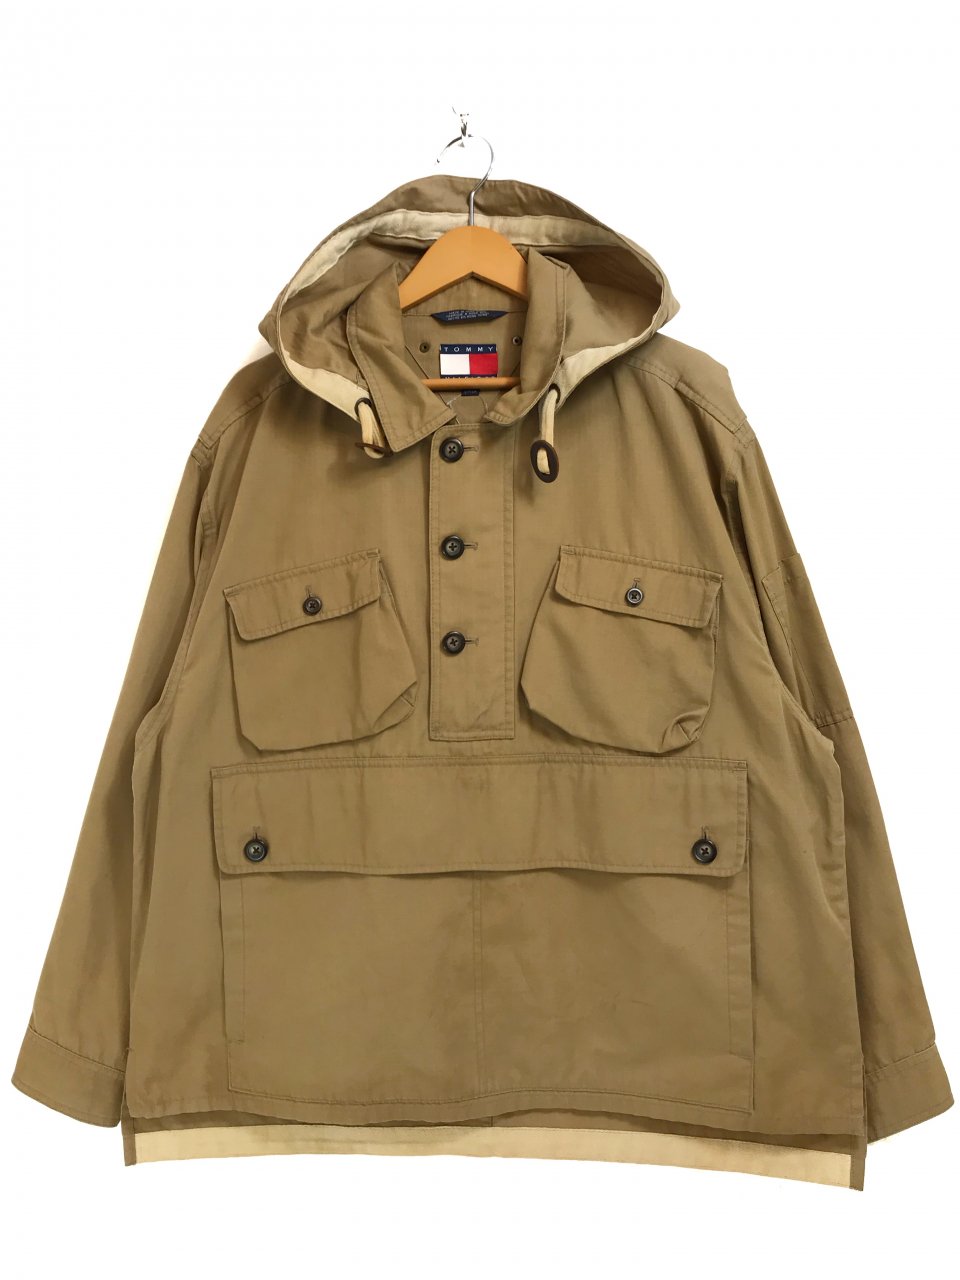 90s TOMMY HILFIGER Rip-Stop Cotton Anorak Parka カーキ S トミー